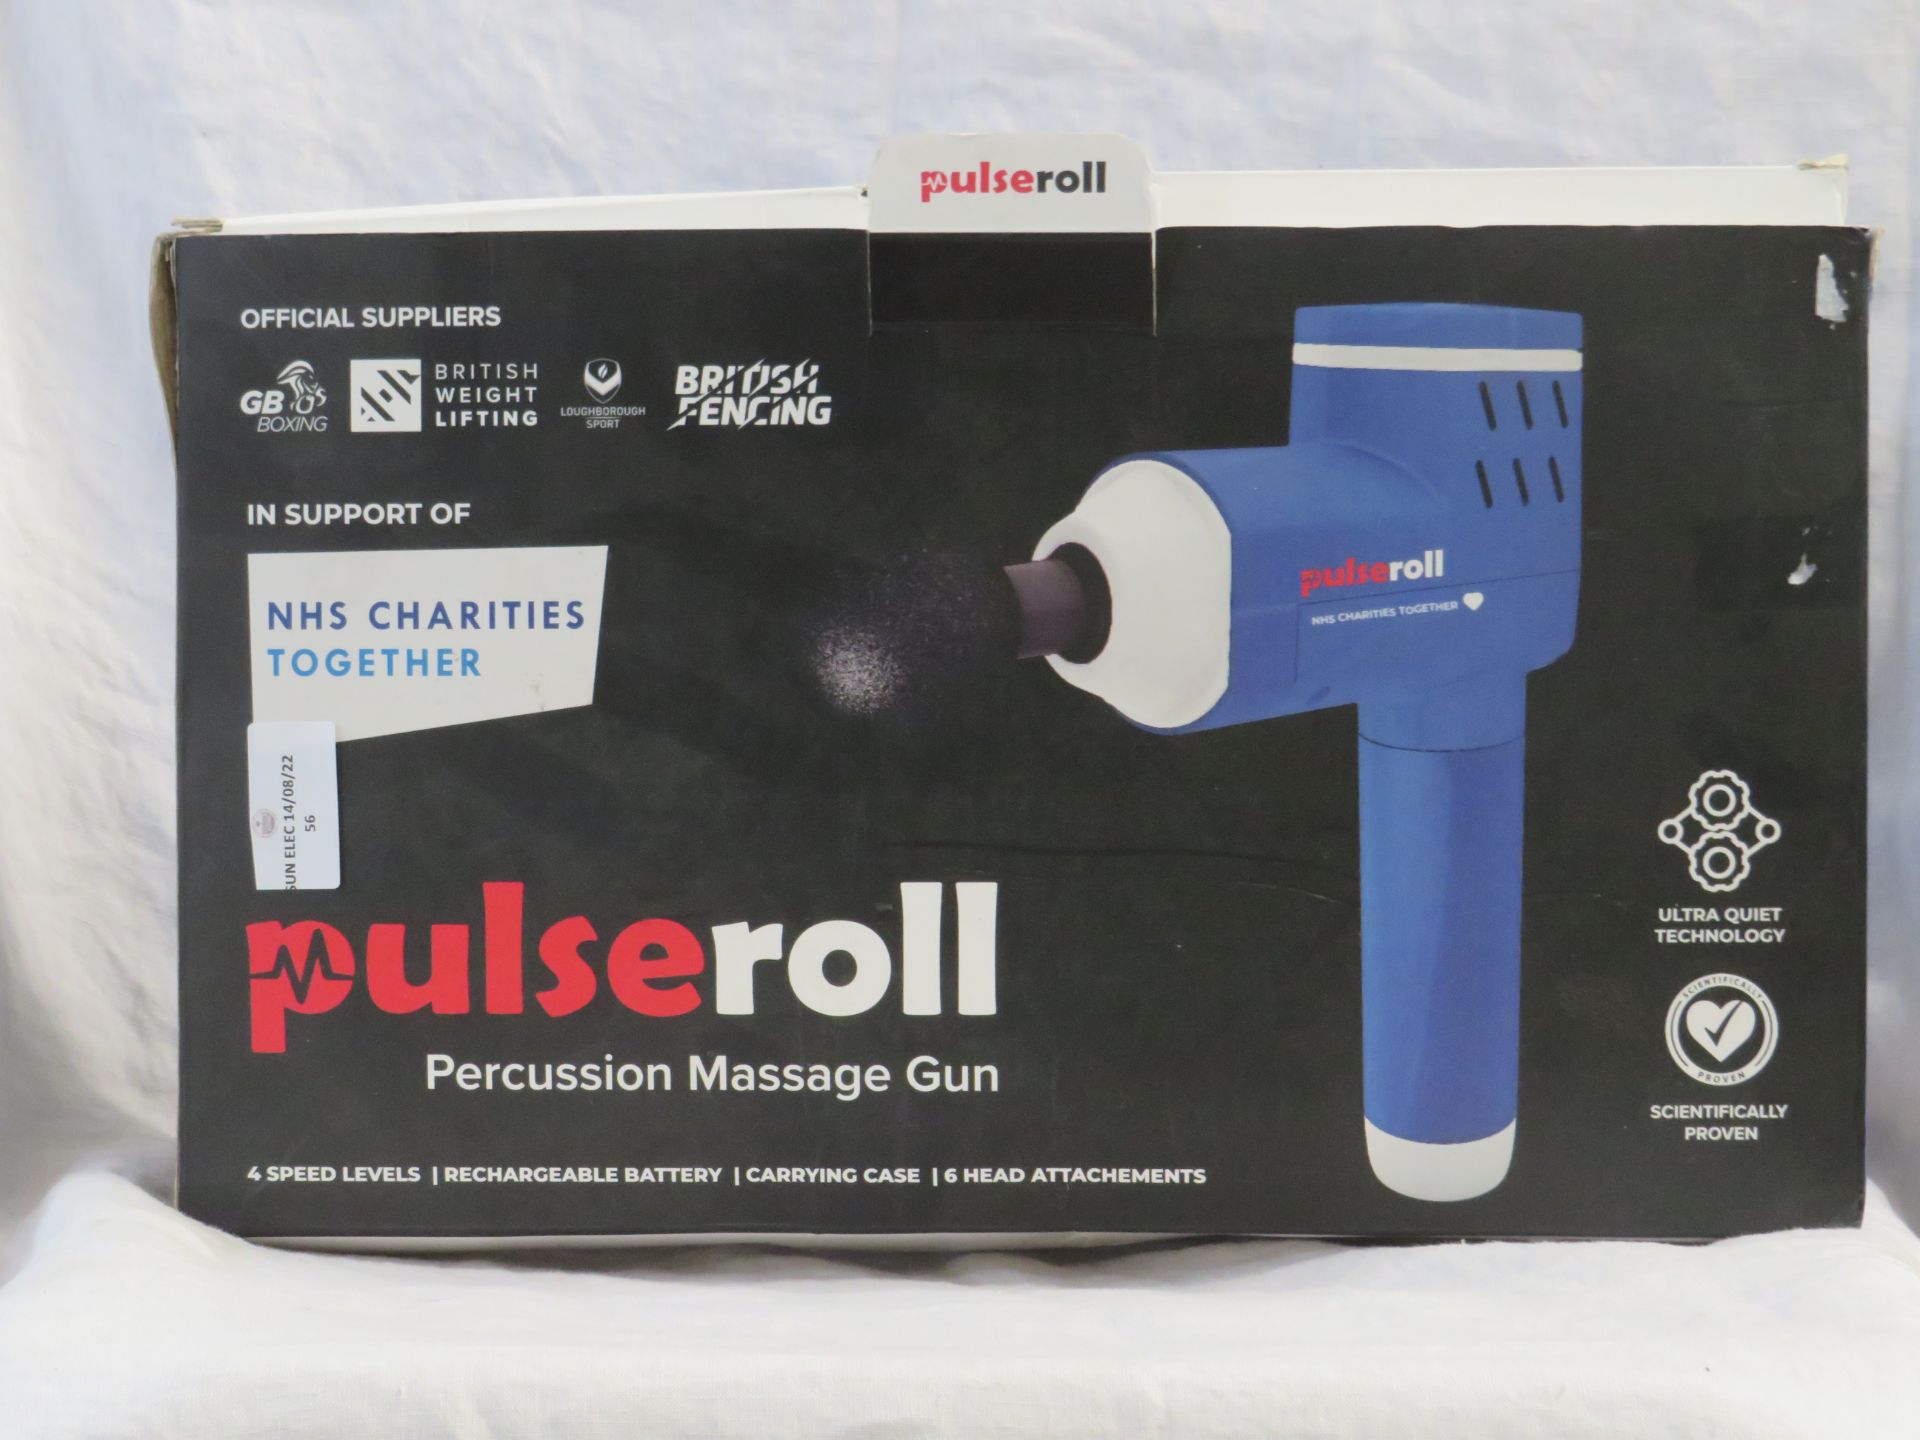 Pulse roll mini massage gun, tested working for percussion with the power it currently has, RRP ?